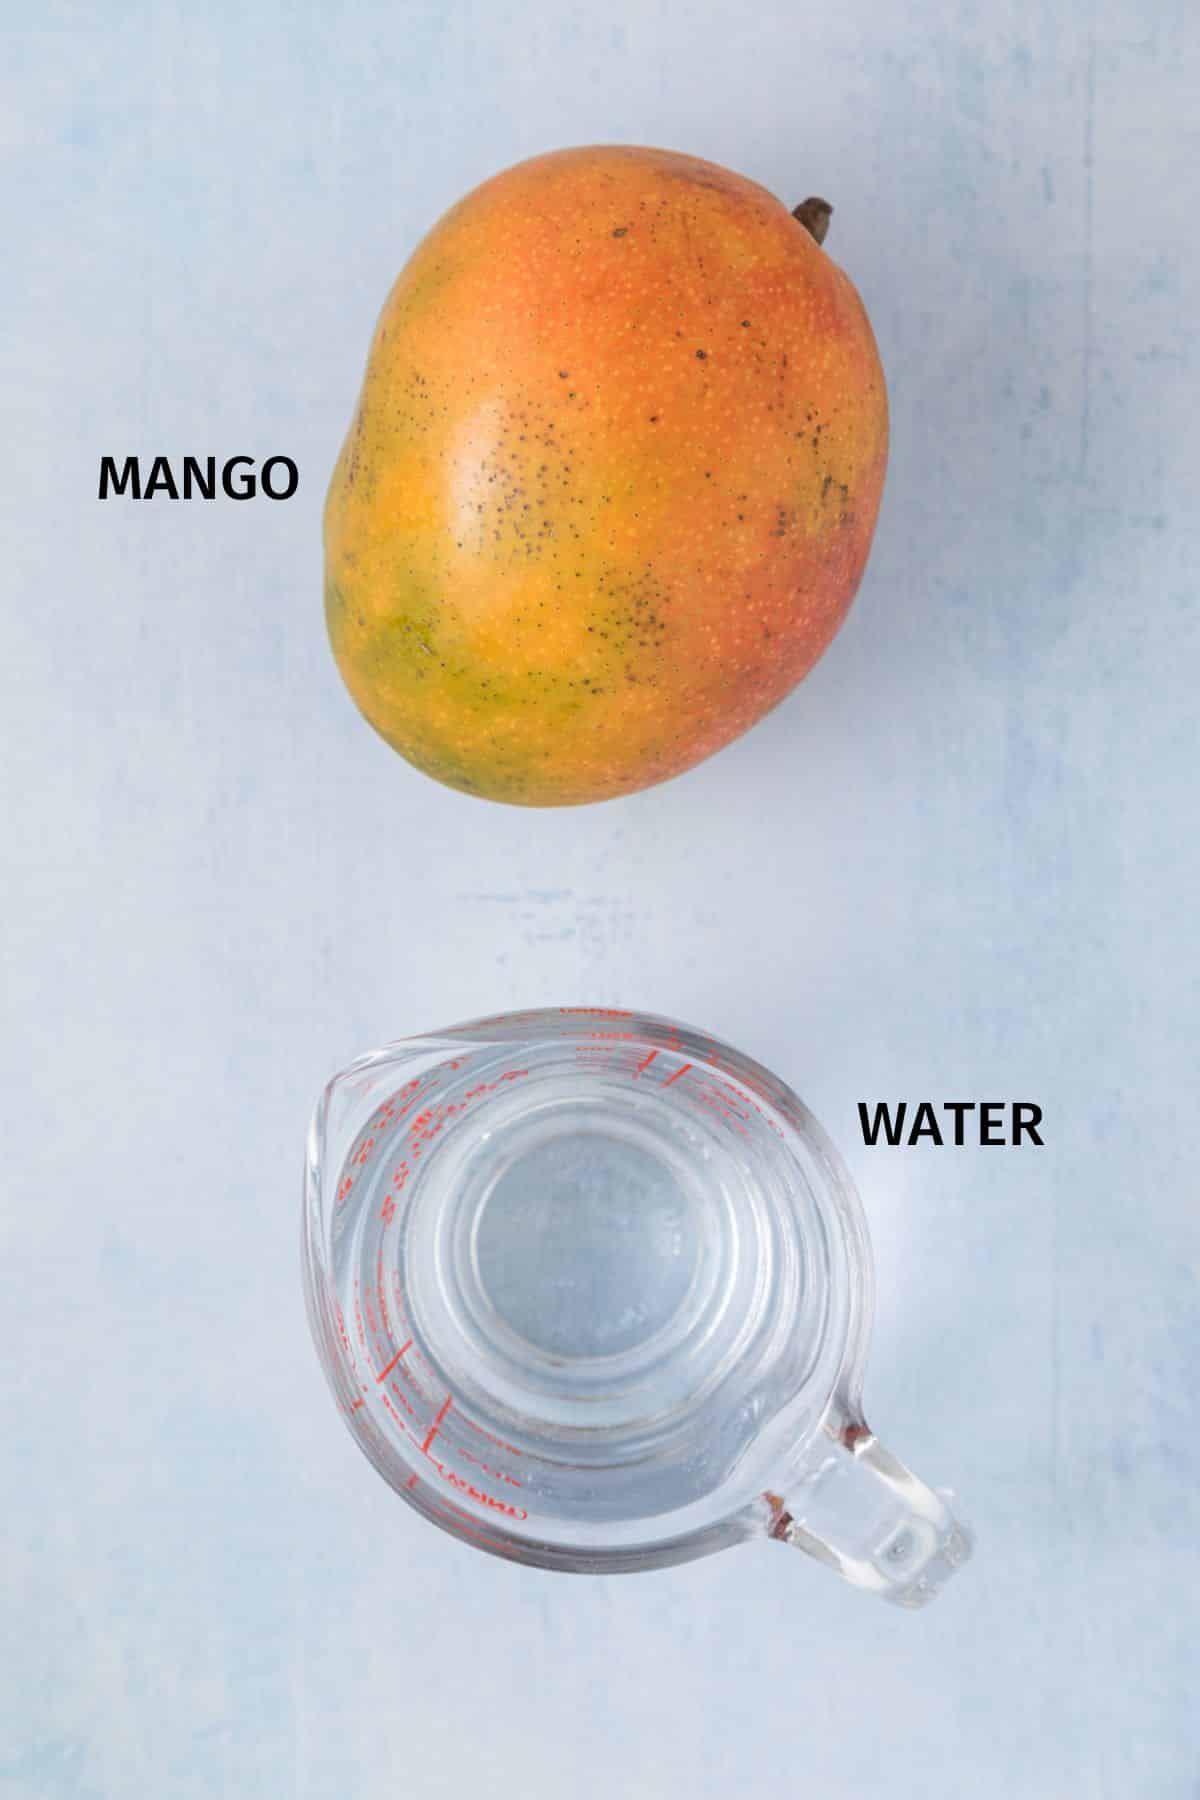 A whole mango and measuring cup of water on a blue surface.